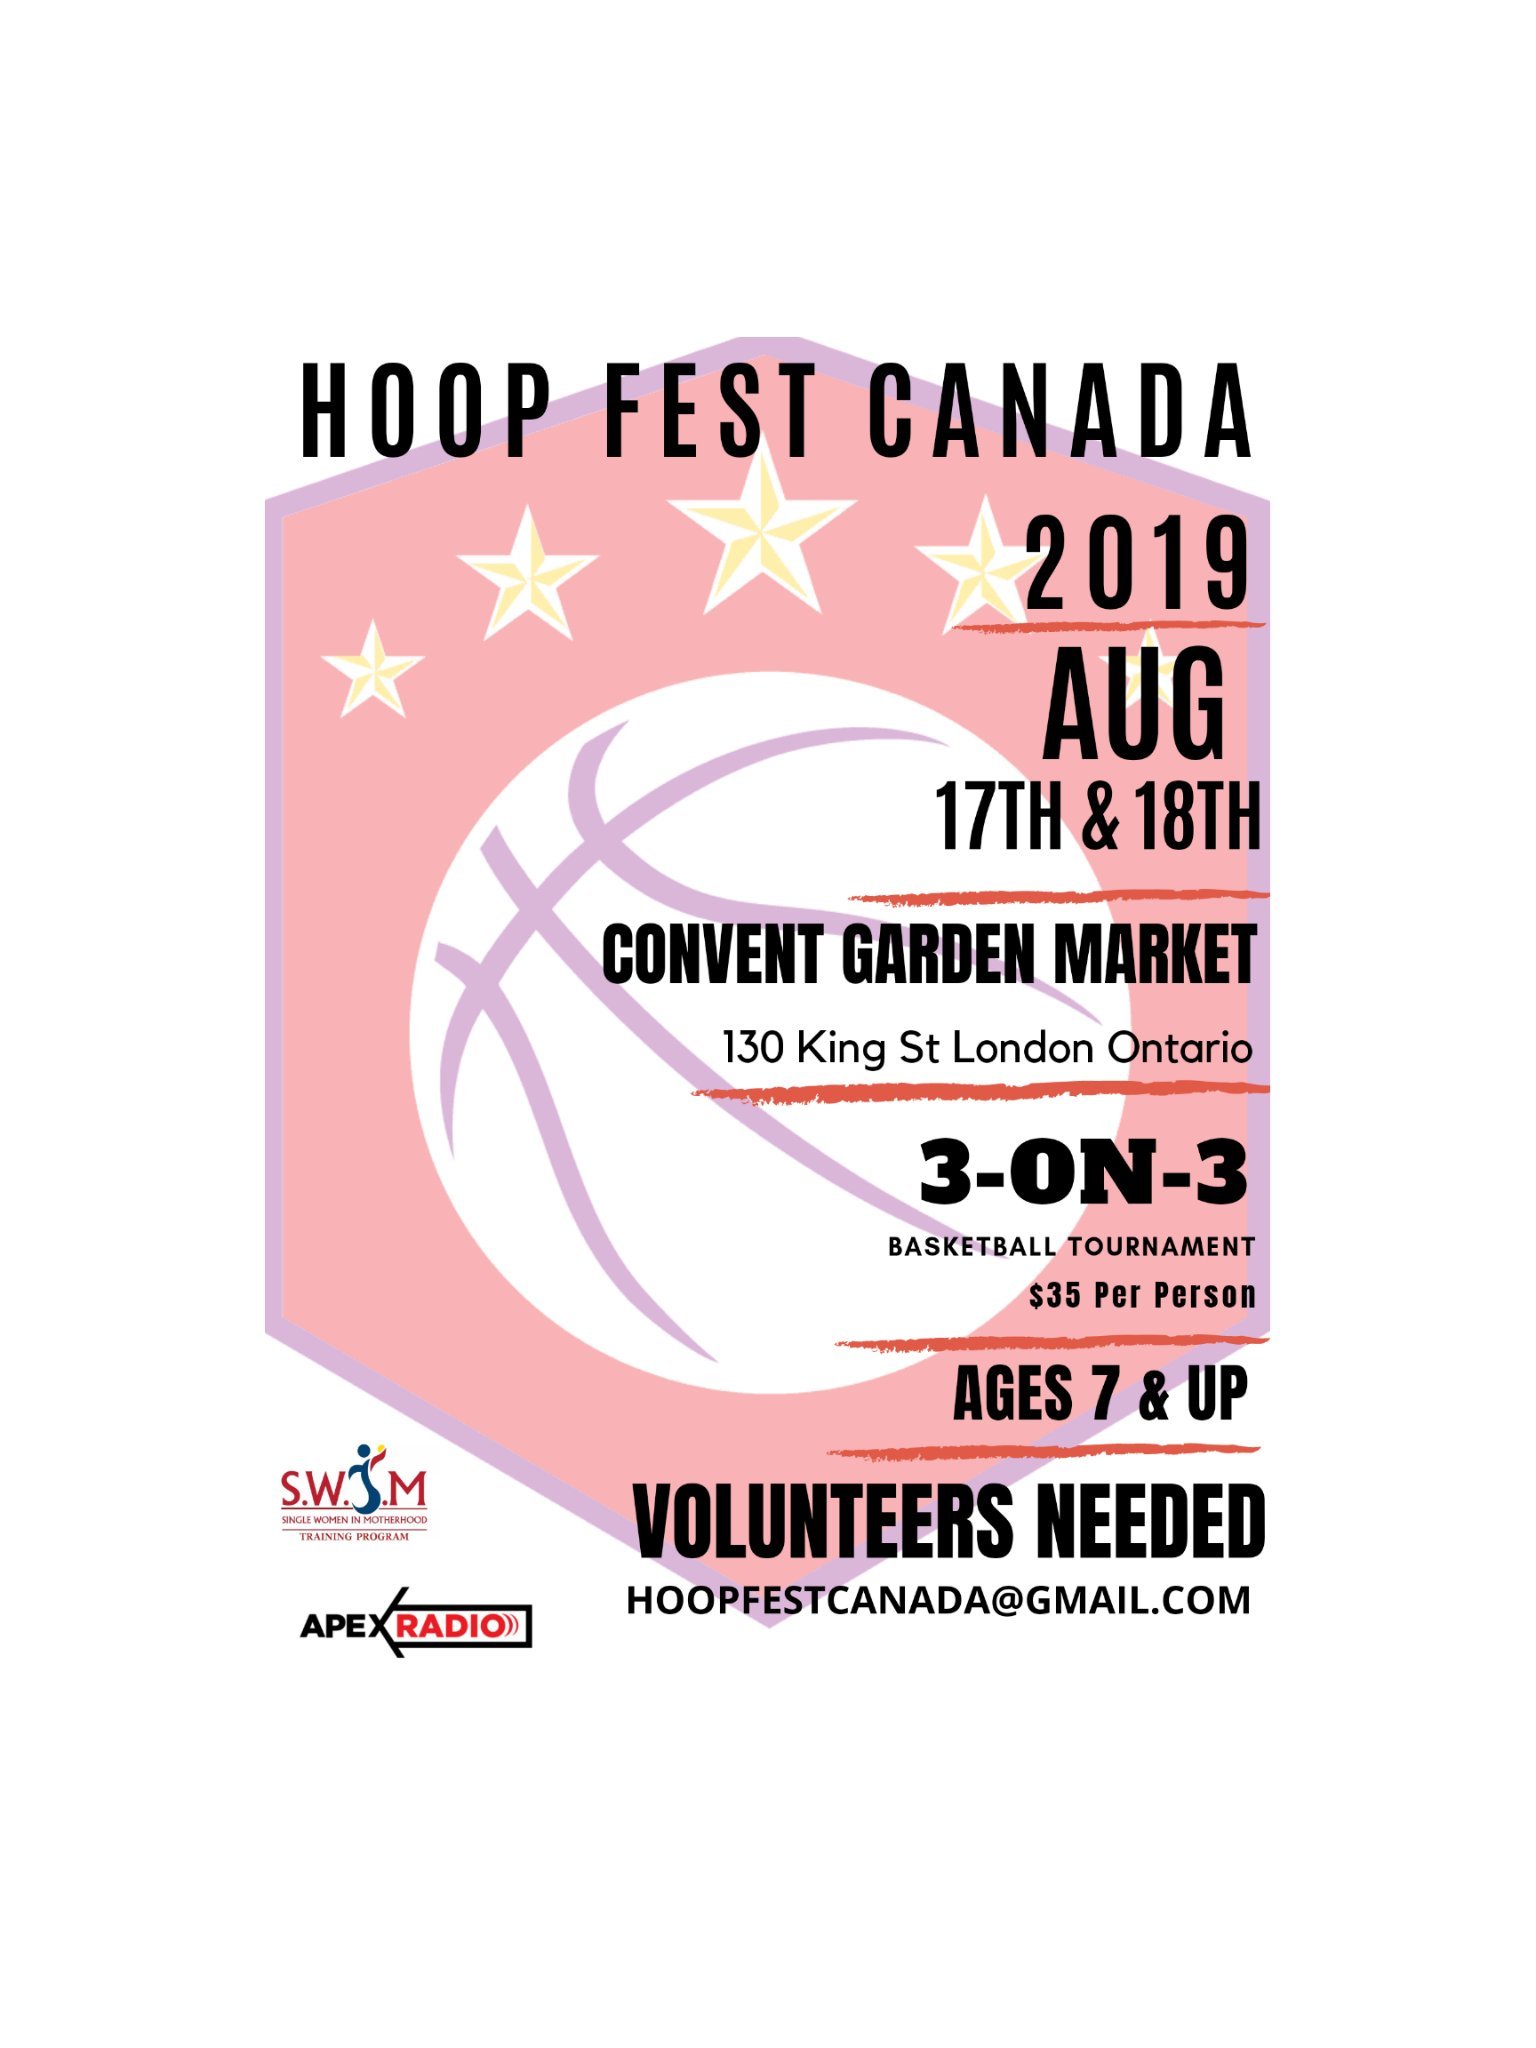 Youngest 3 on 3 Basketball Tournament in London!  Presented by S.W.I.M, Apexx Radio & the Kids Matter Movement https://t.co/J6gDFrlNed